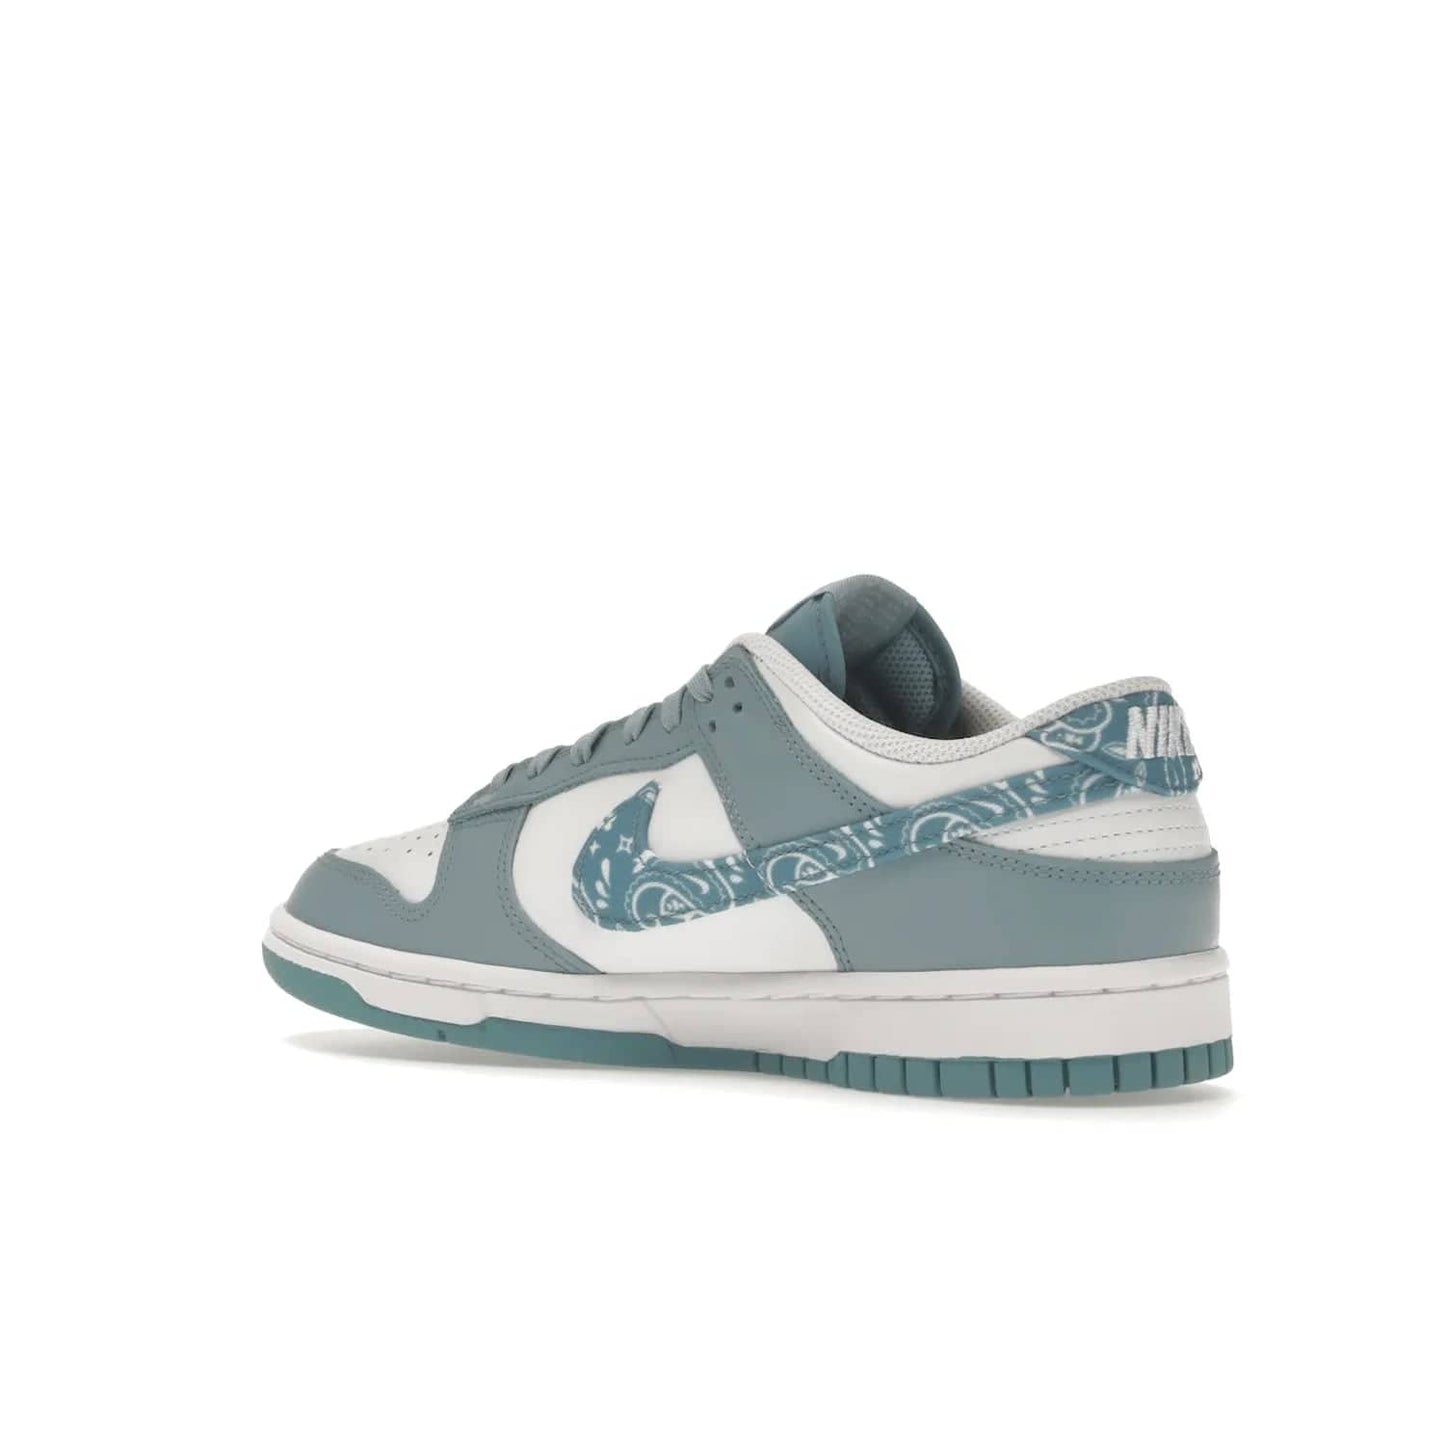 Nike Dunk Low Essential Paisley Pack Worn Blue (Women's) - Image 23 - Only at www.BallersClubKickz.com - Get the Nike Dunk Low Essential Paisley Pack Worn Blue (Women's) for style and comfort. White leather construction, light blue leather overlays, canvas Swooshes and matching heel tabs offer a rich blue hue. Finished by a white and light blue sole, this classic Nike Dunk is the perfect addition to any wardrobe. Released in March 2022.